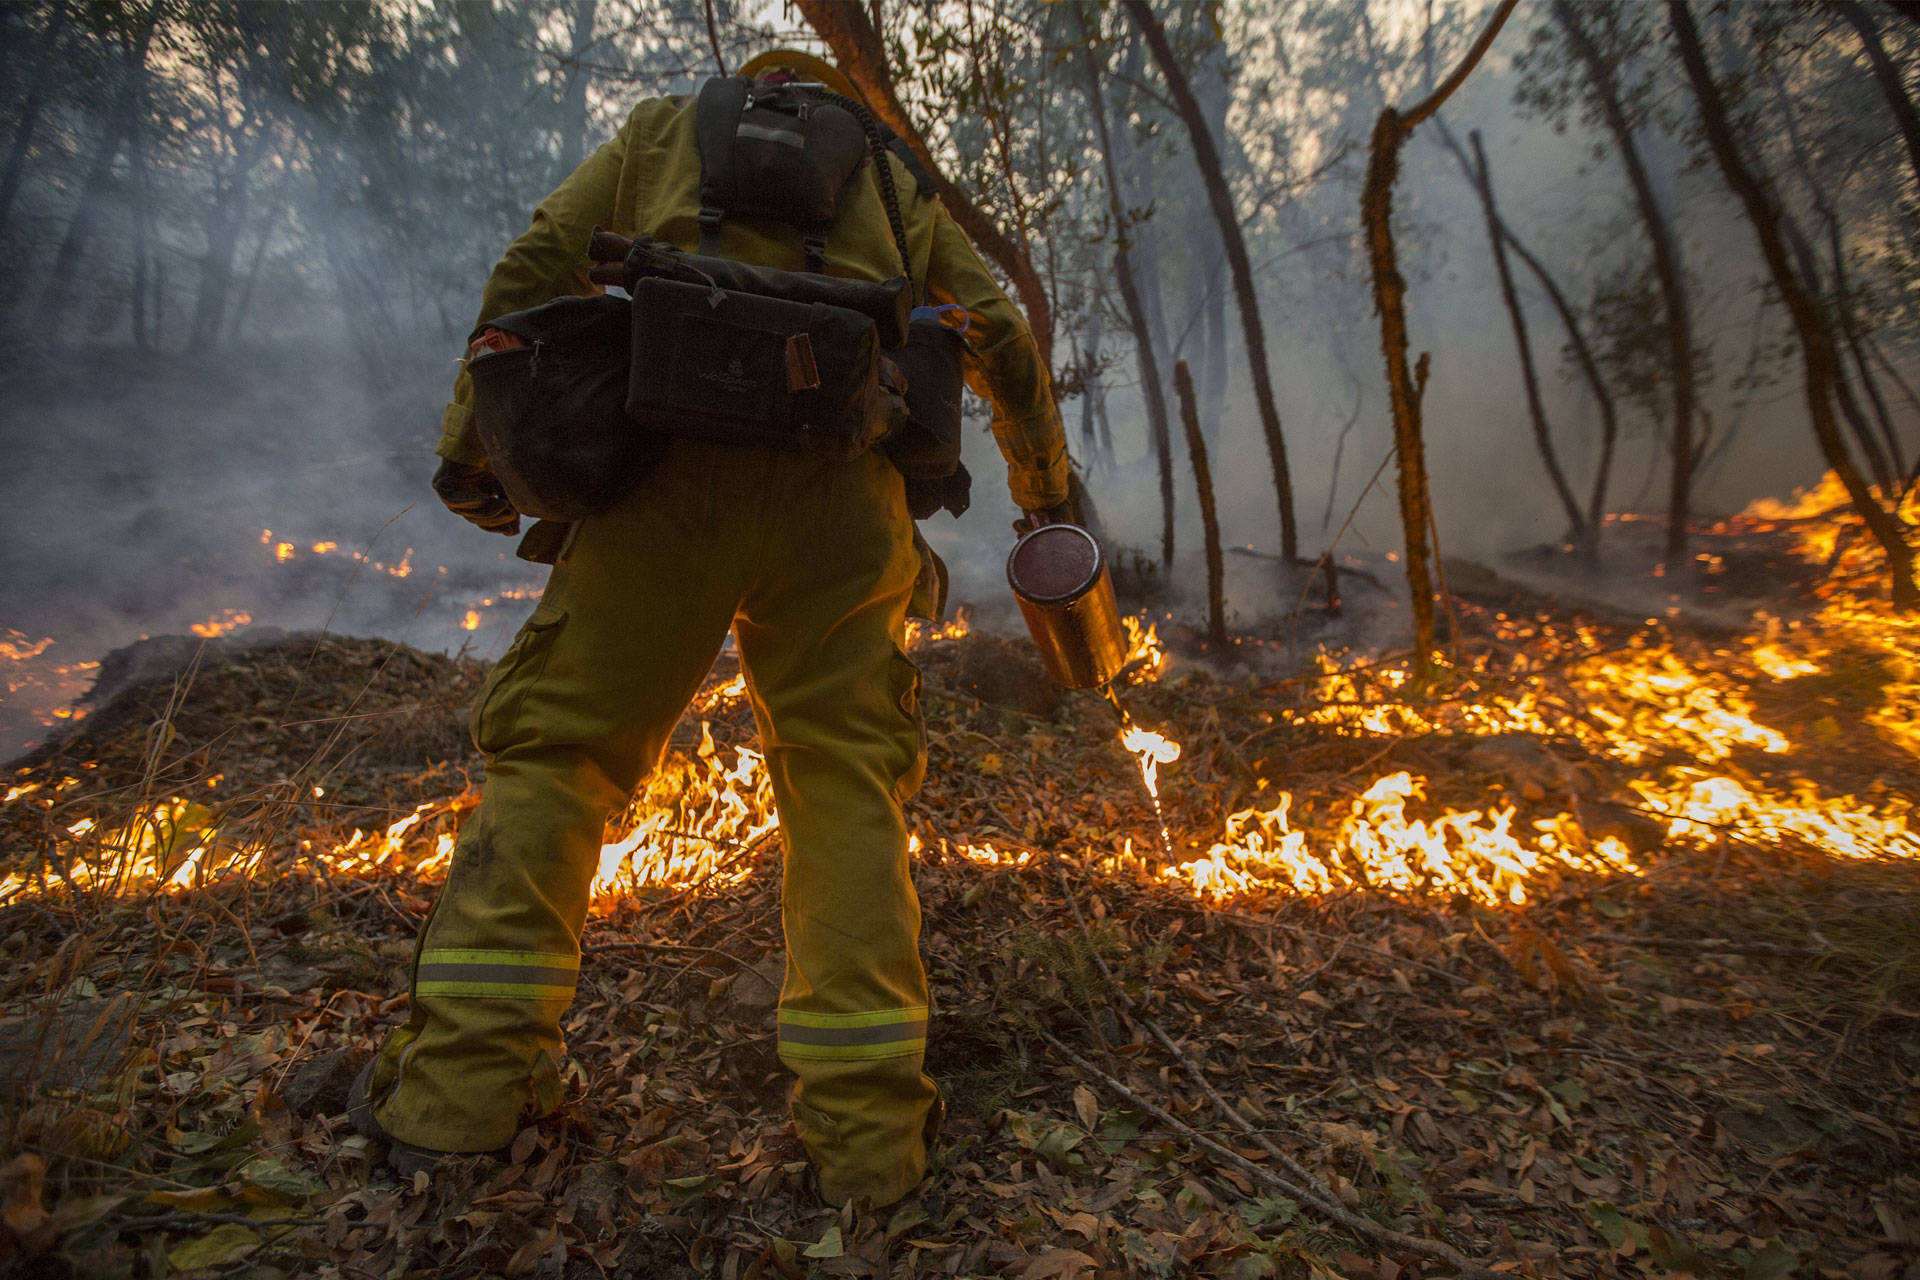 A firefighter uses a drip torch to set a backfire to protect houses in Adobe Canyon during the Nuns Fire on October 15, 2017 near Santa Rosa. David McNew/Getty Images